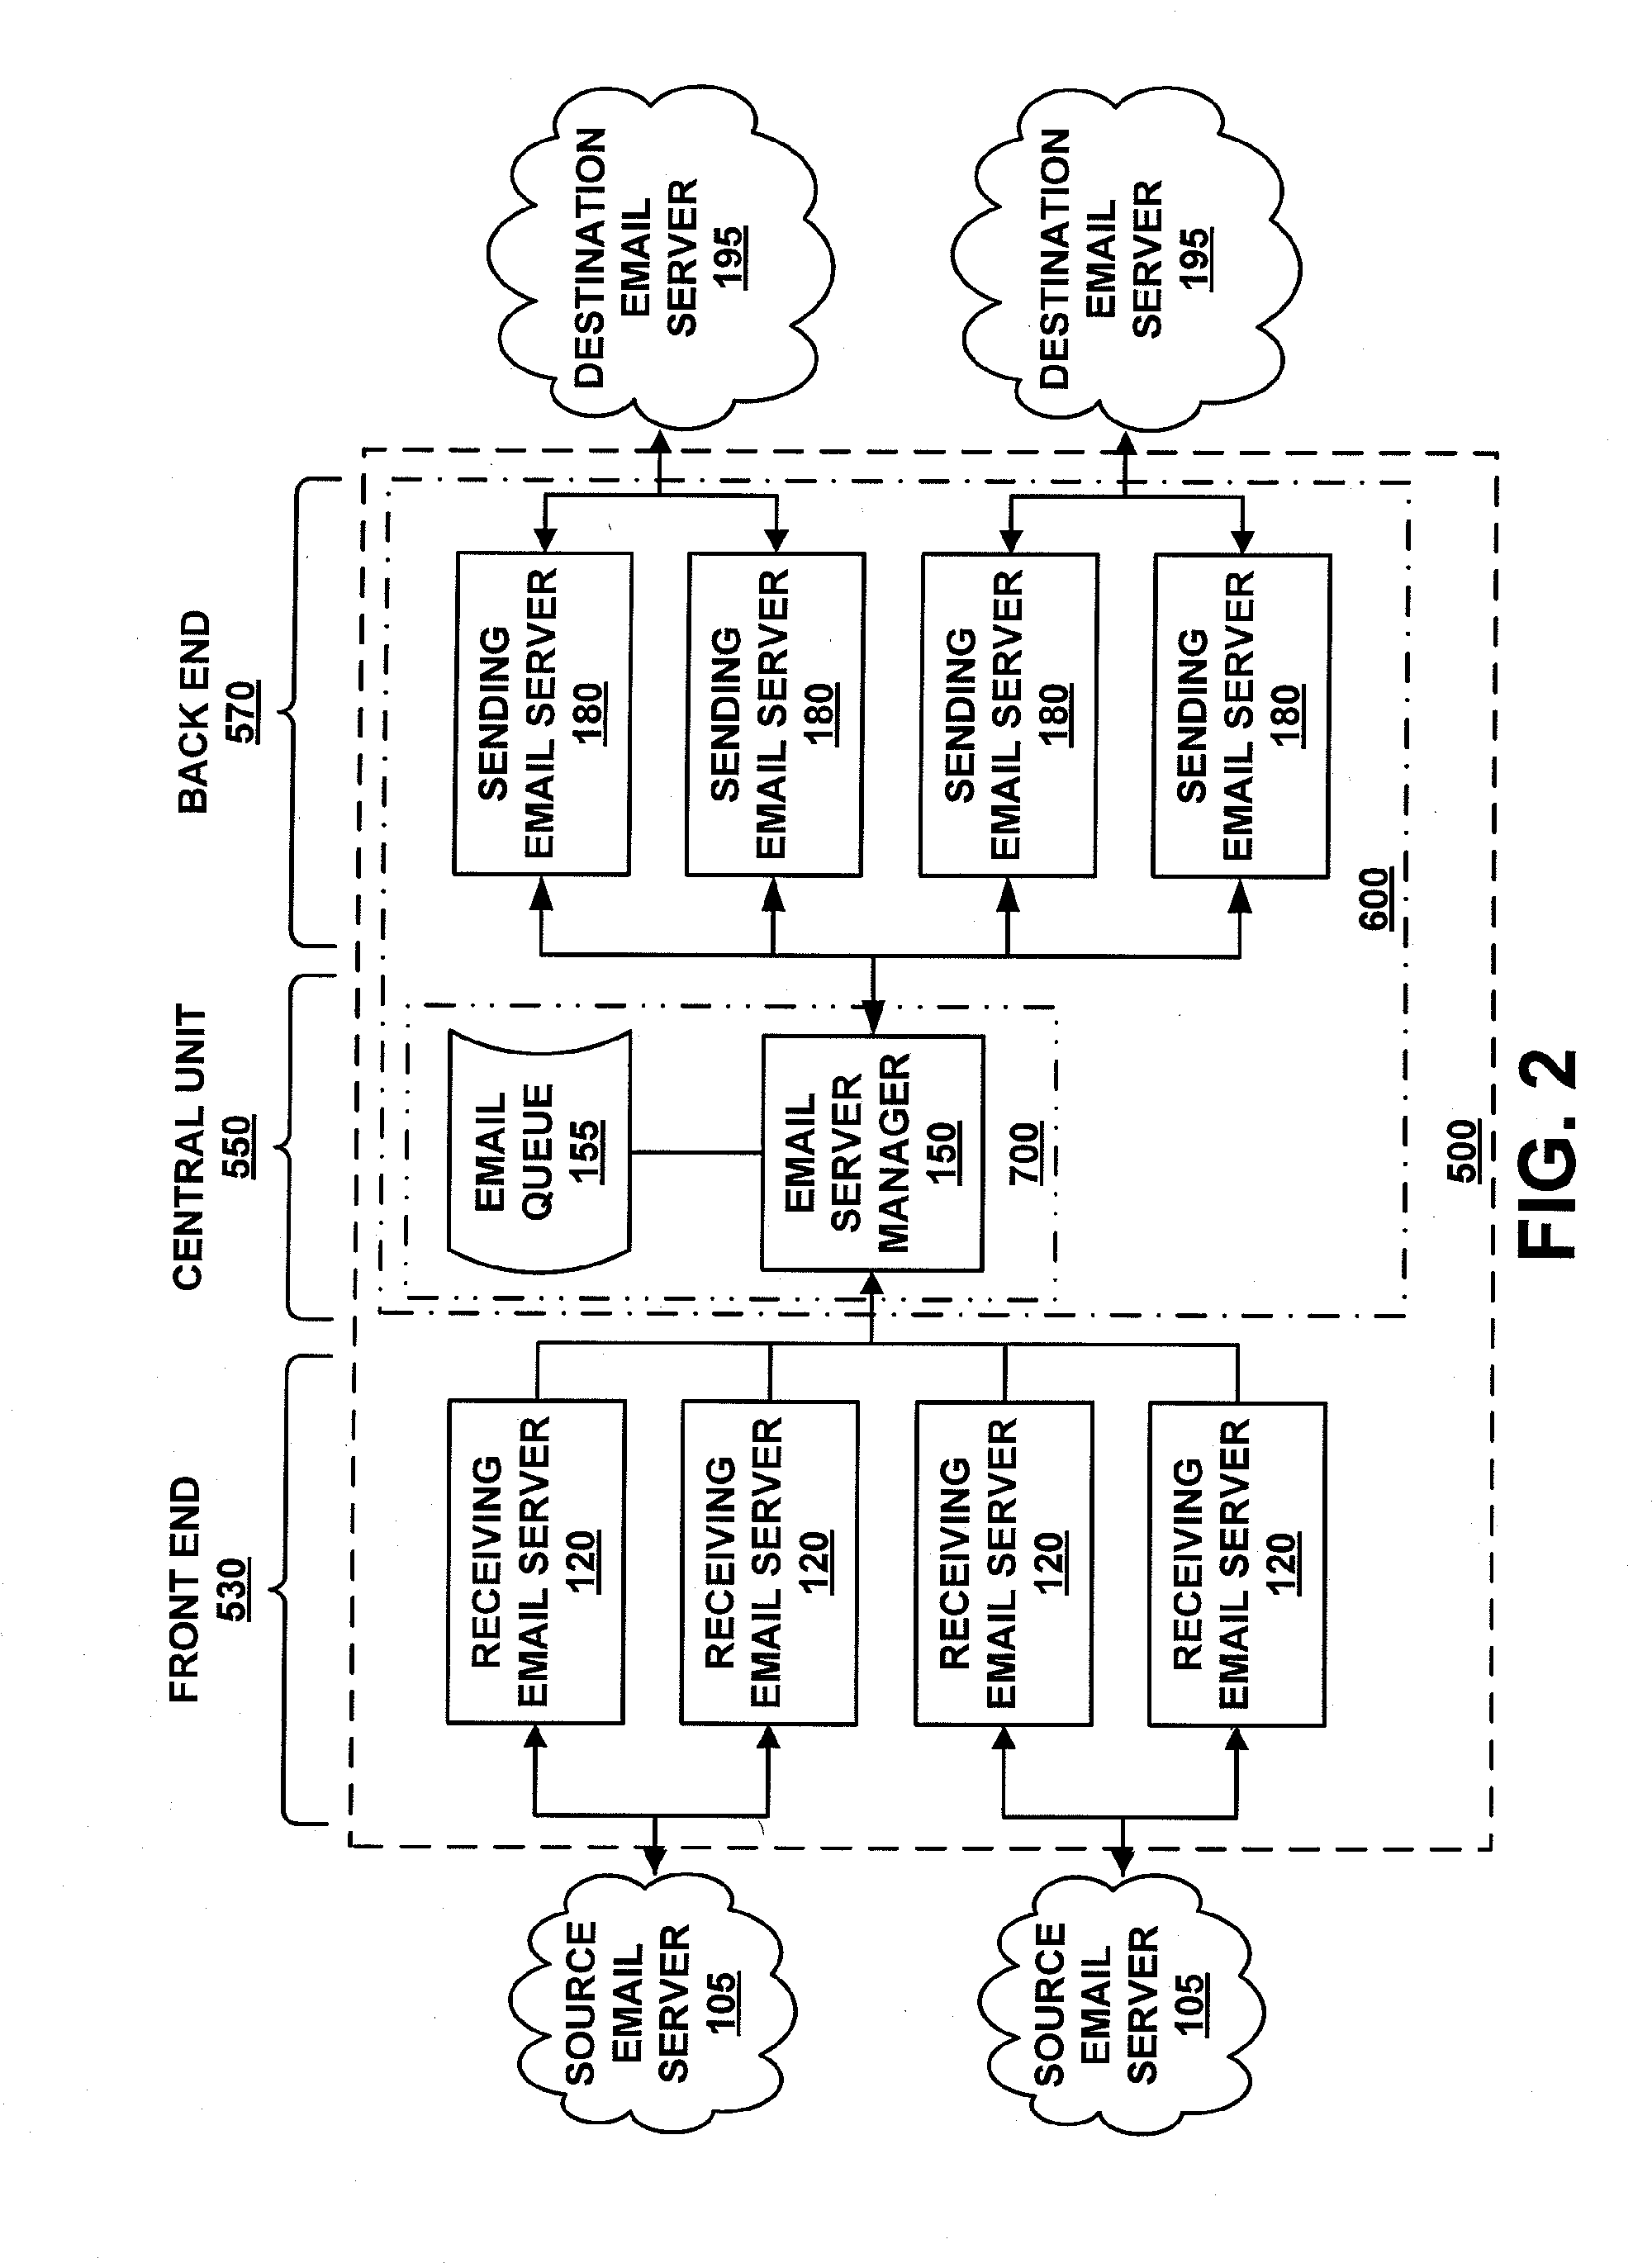 Intelligent electronic mail server manager, and system and method for coordinating operation of multiple electronic mail servers